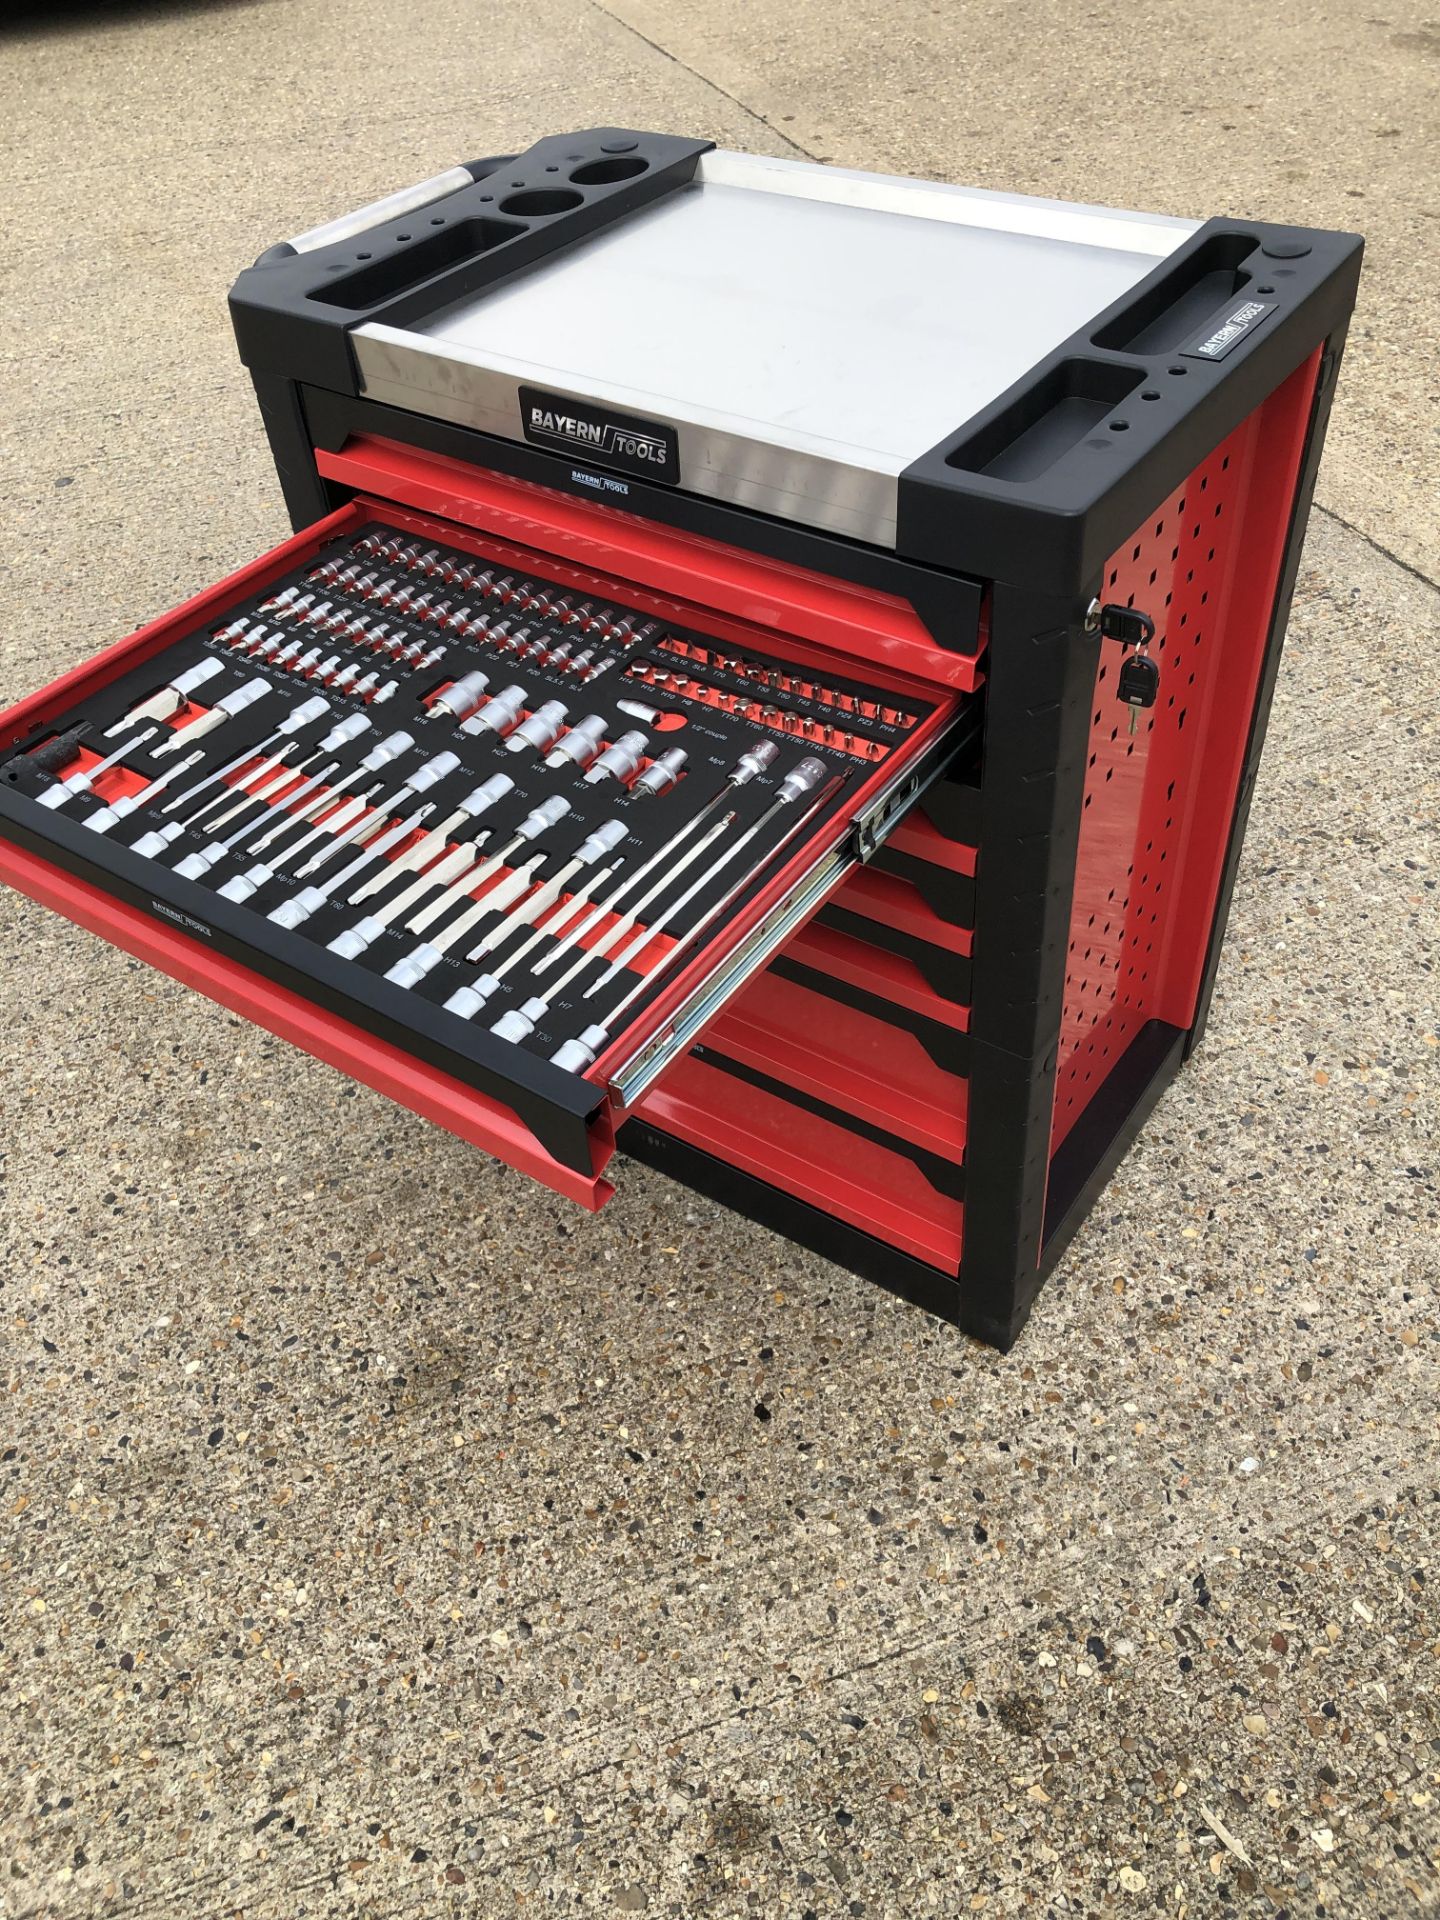 V Brand New Professional Locking Garage Tool Trolley/Cabinet (Red/Blue) with Metal Top and 7 Drawers - Image 5 of 12